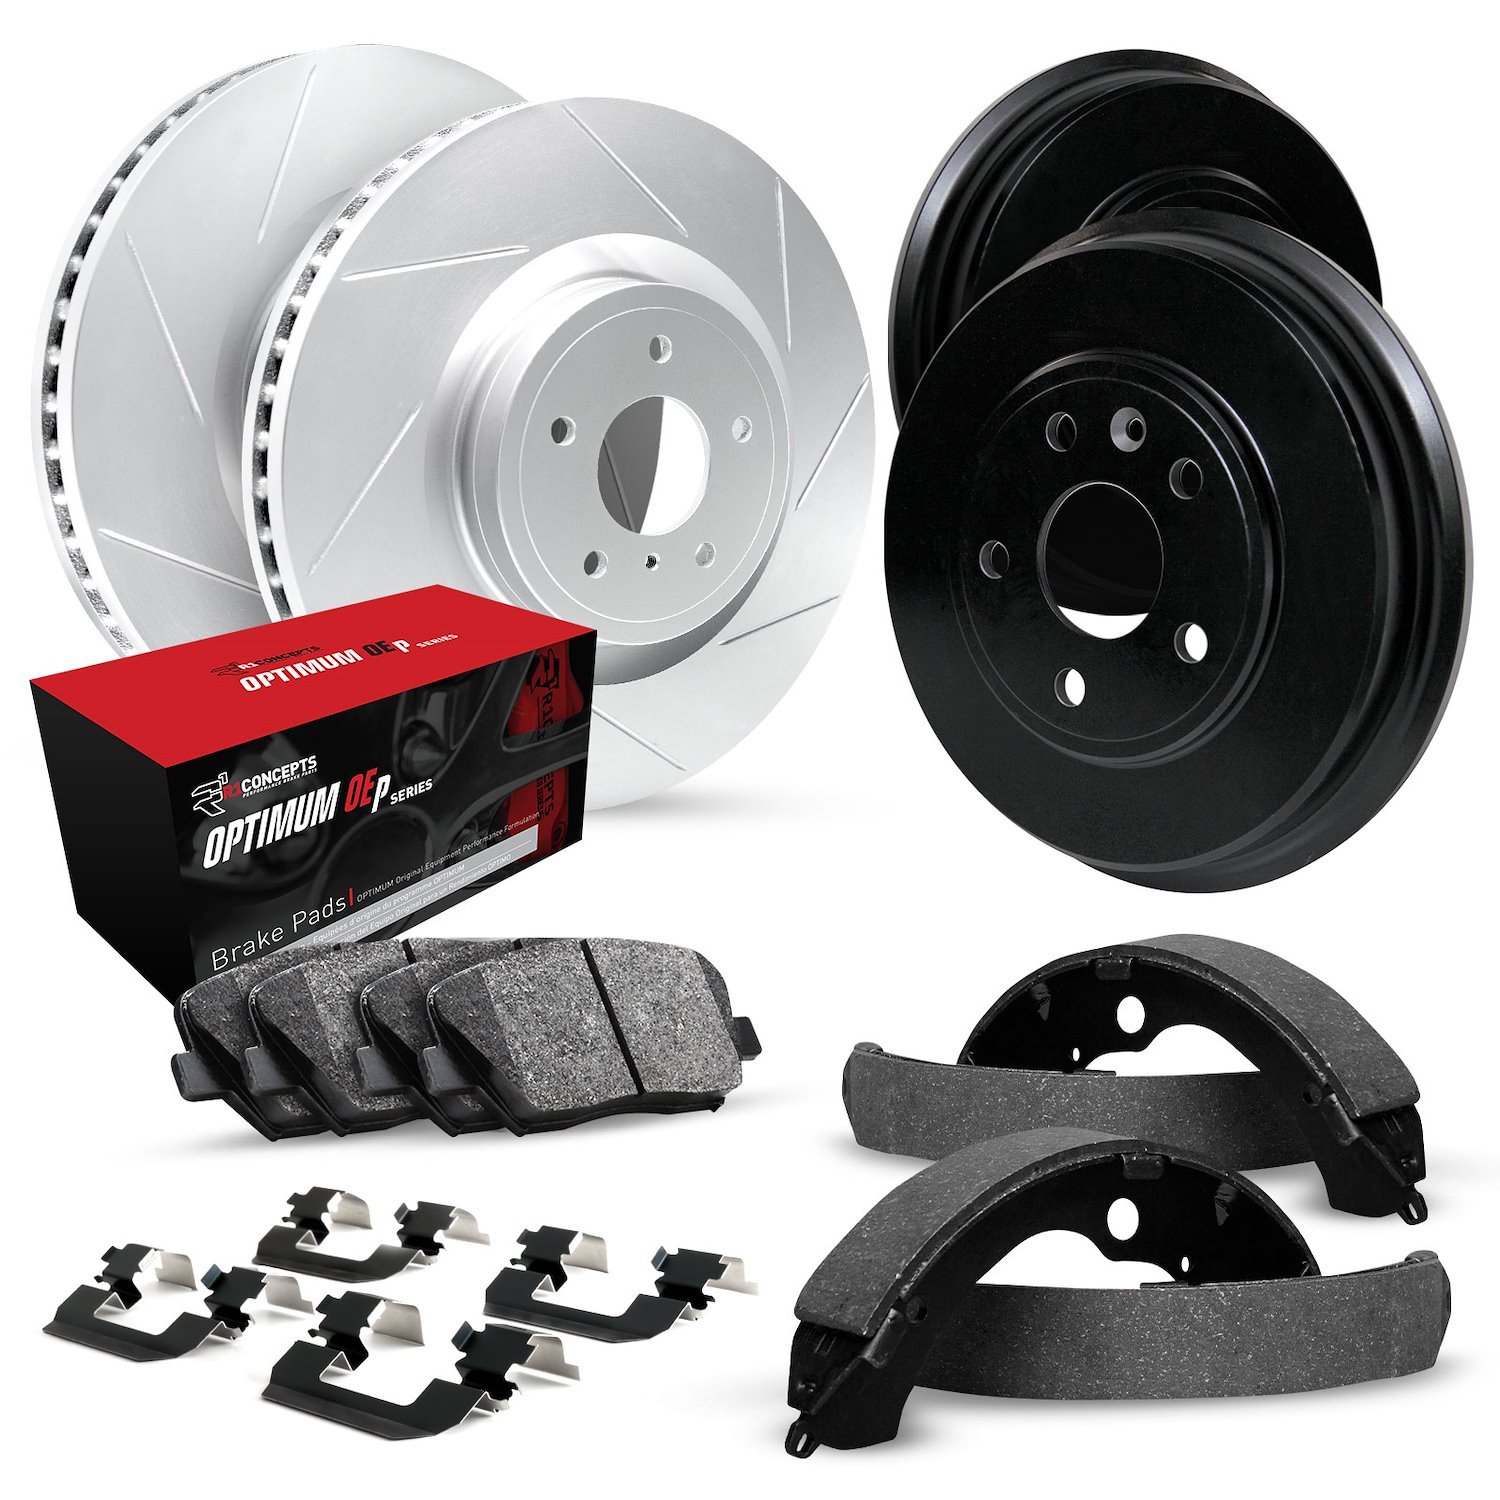 GEO-Carbon Slotted Brake Rotor & Drum Set w/Optimum OE Pads, Shoes, & Hardware, 1972-1982 GM, Position: Front & Rear